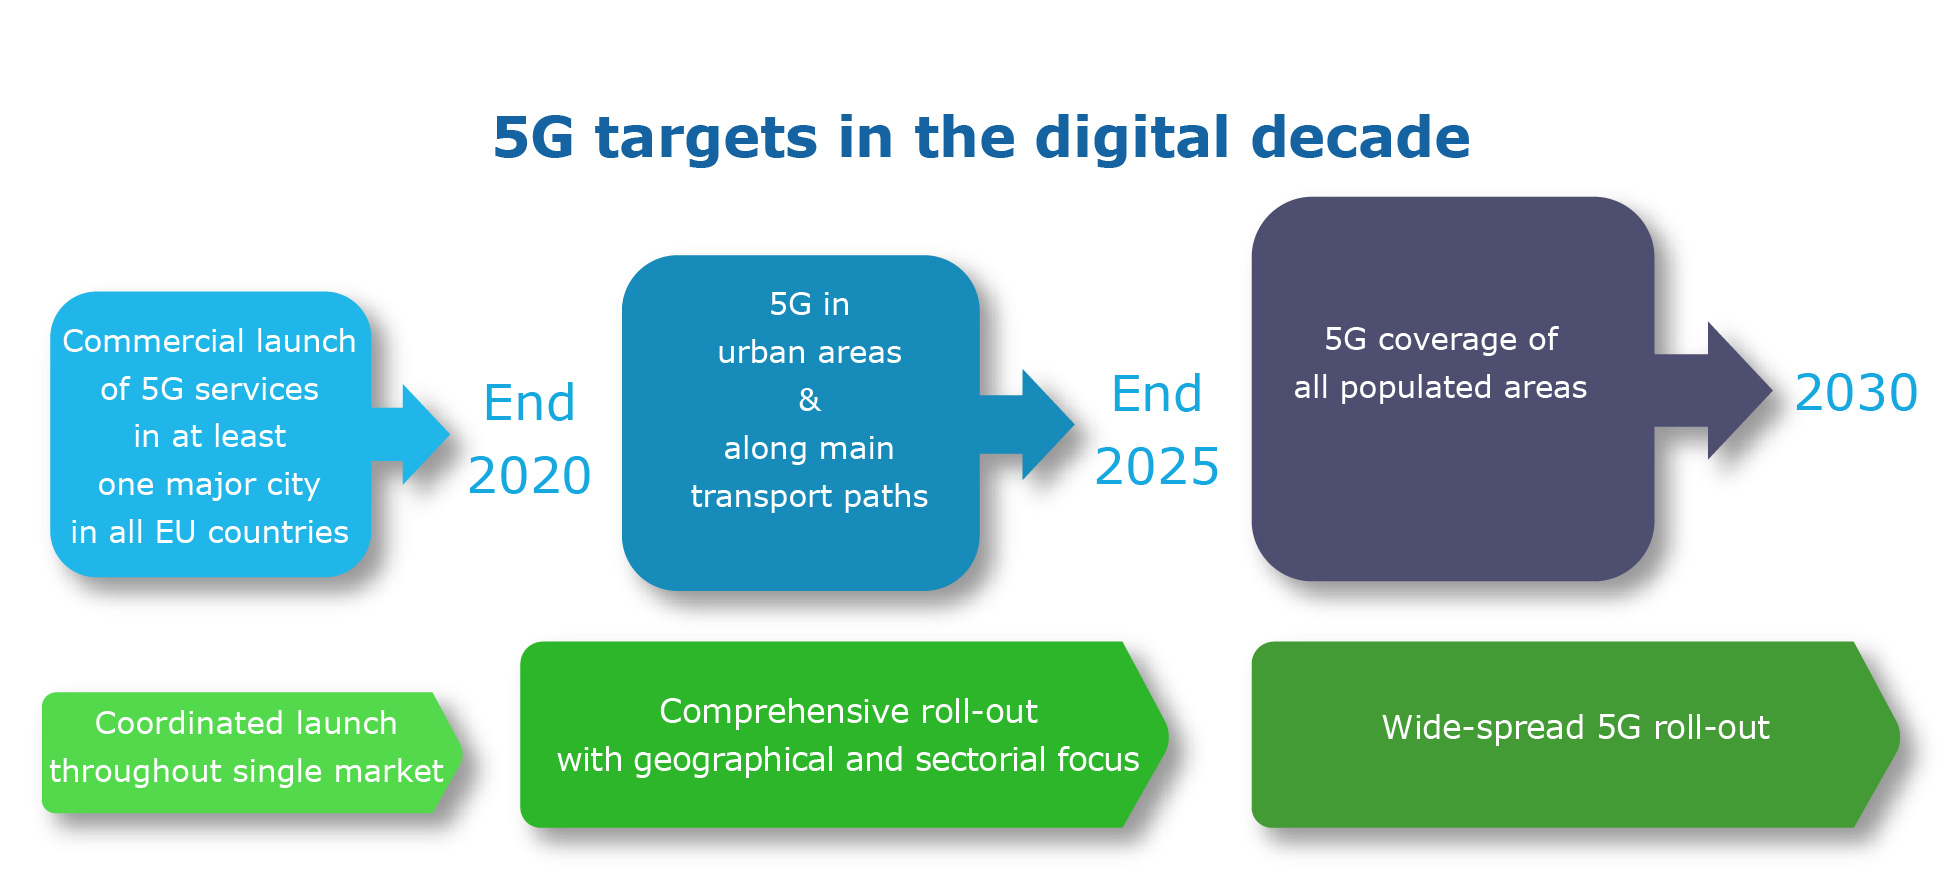 5G targets for the digital decade: coverage of all populated areas by 2030